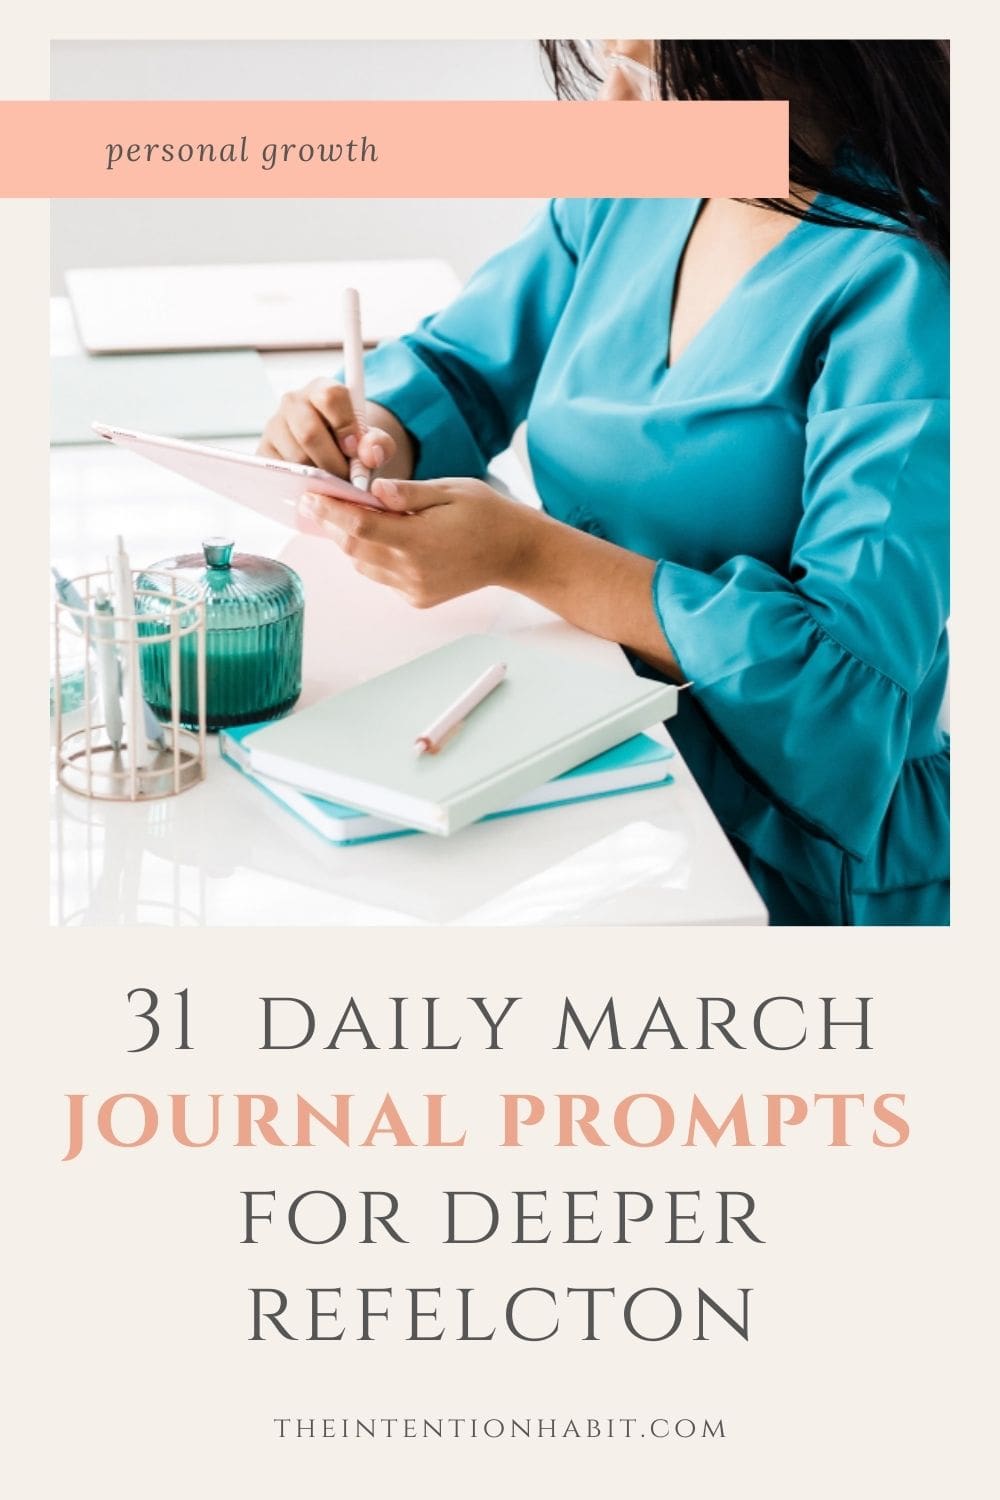 31 daily march journal prompts for deeper reflection.